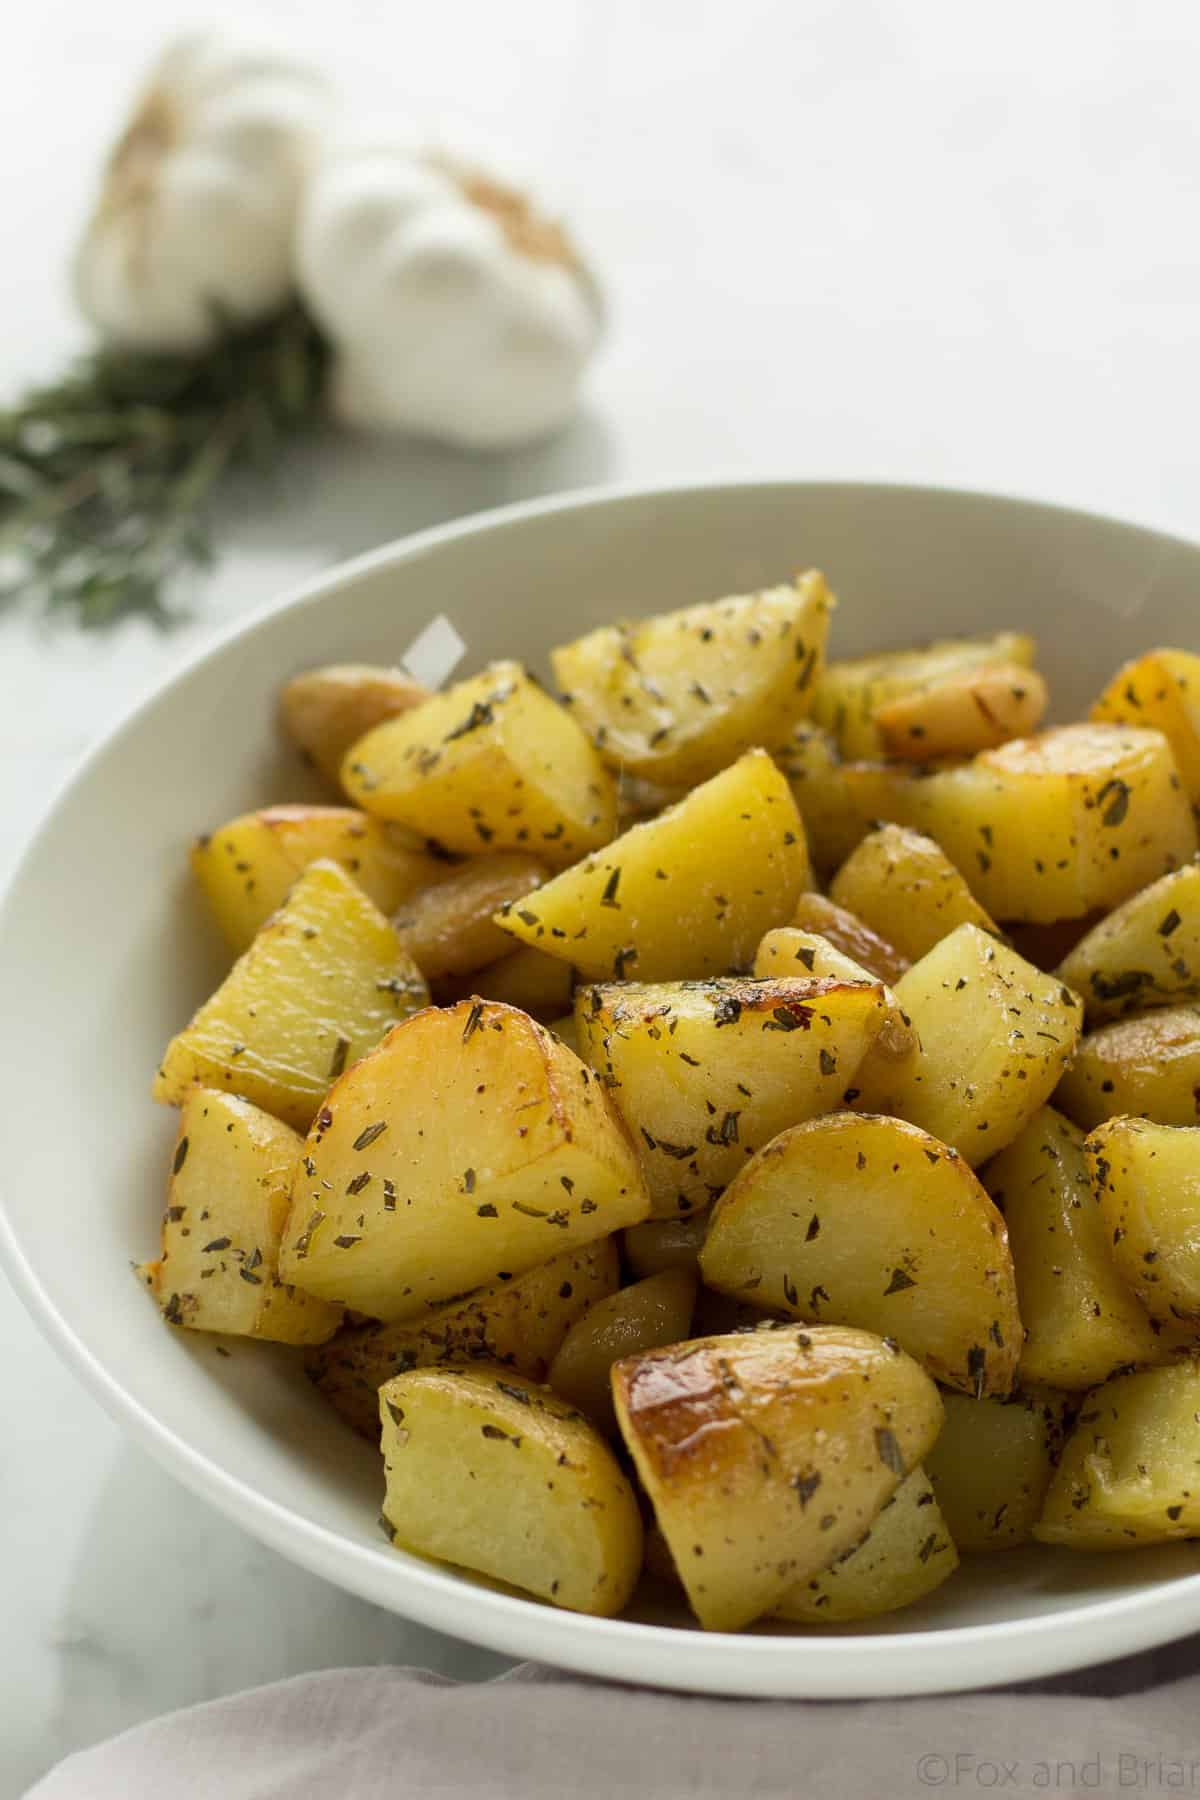 Golden potatoes roasted with garlic and rosemary are your perfect side dish.